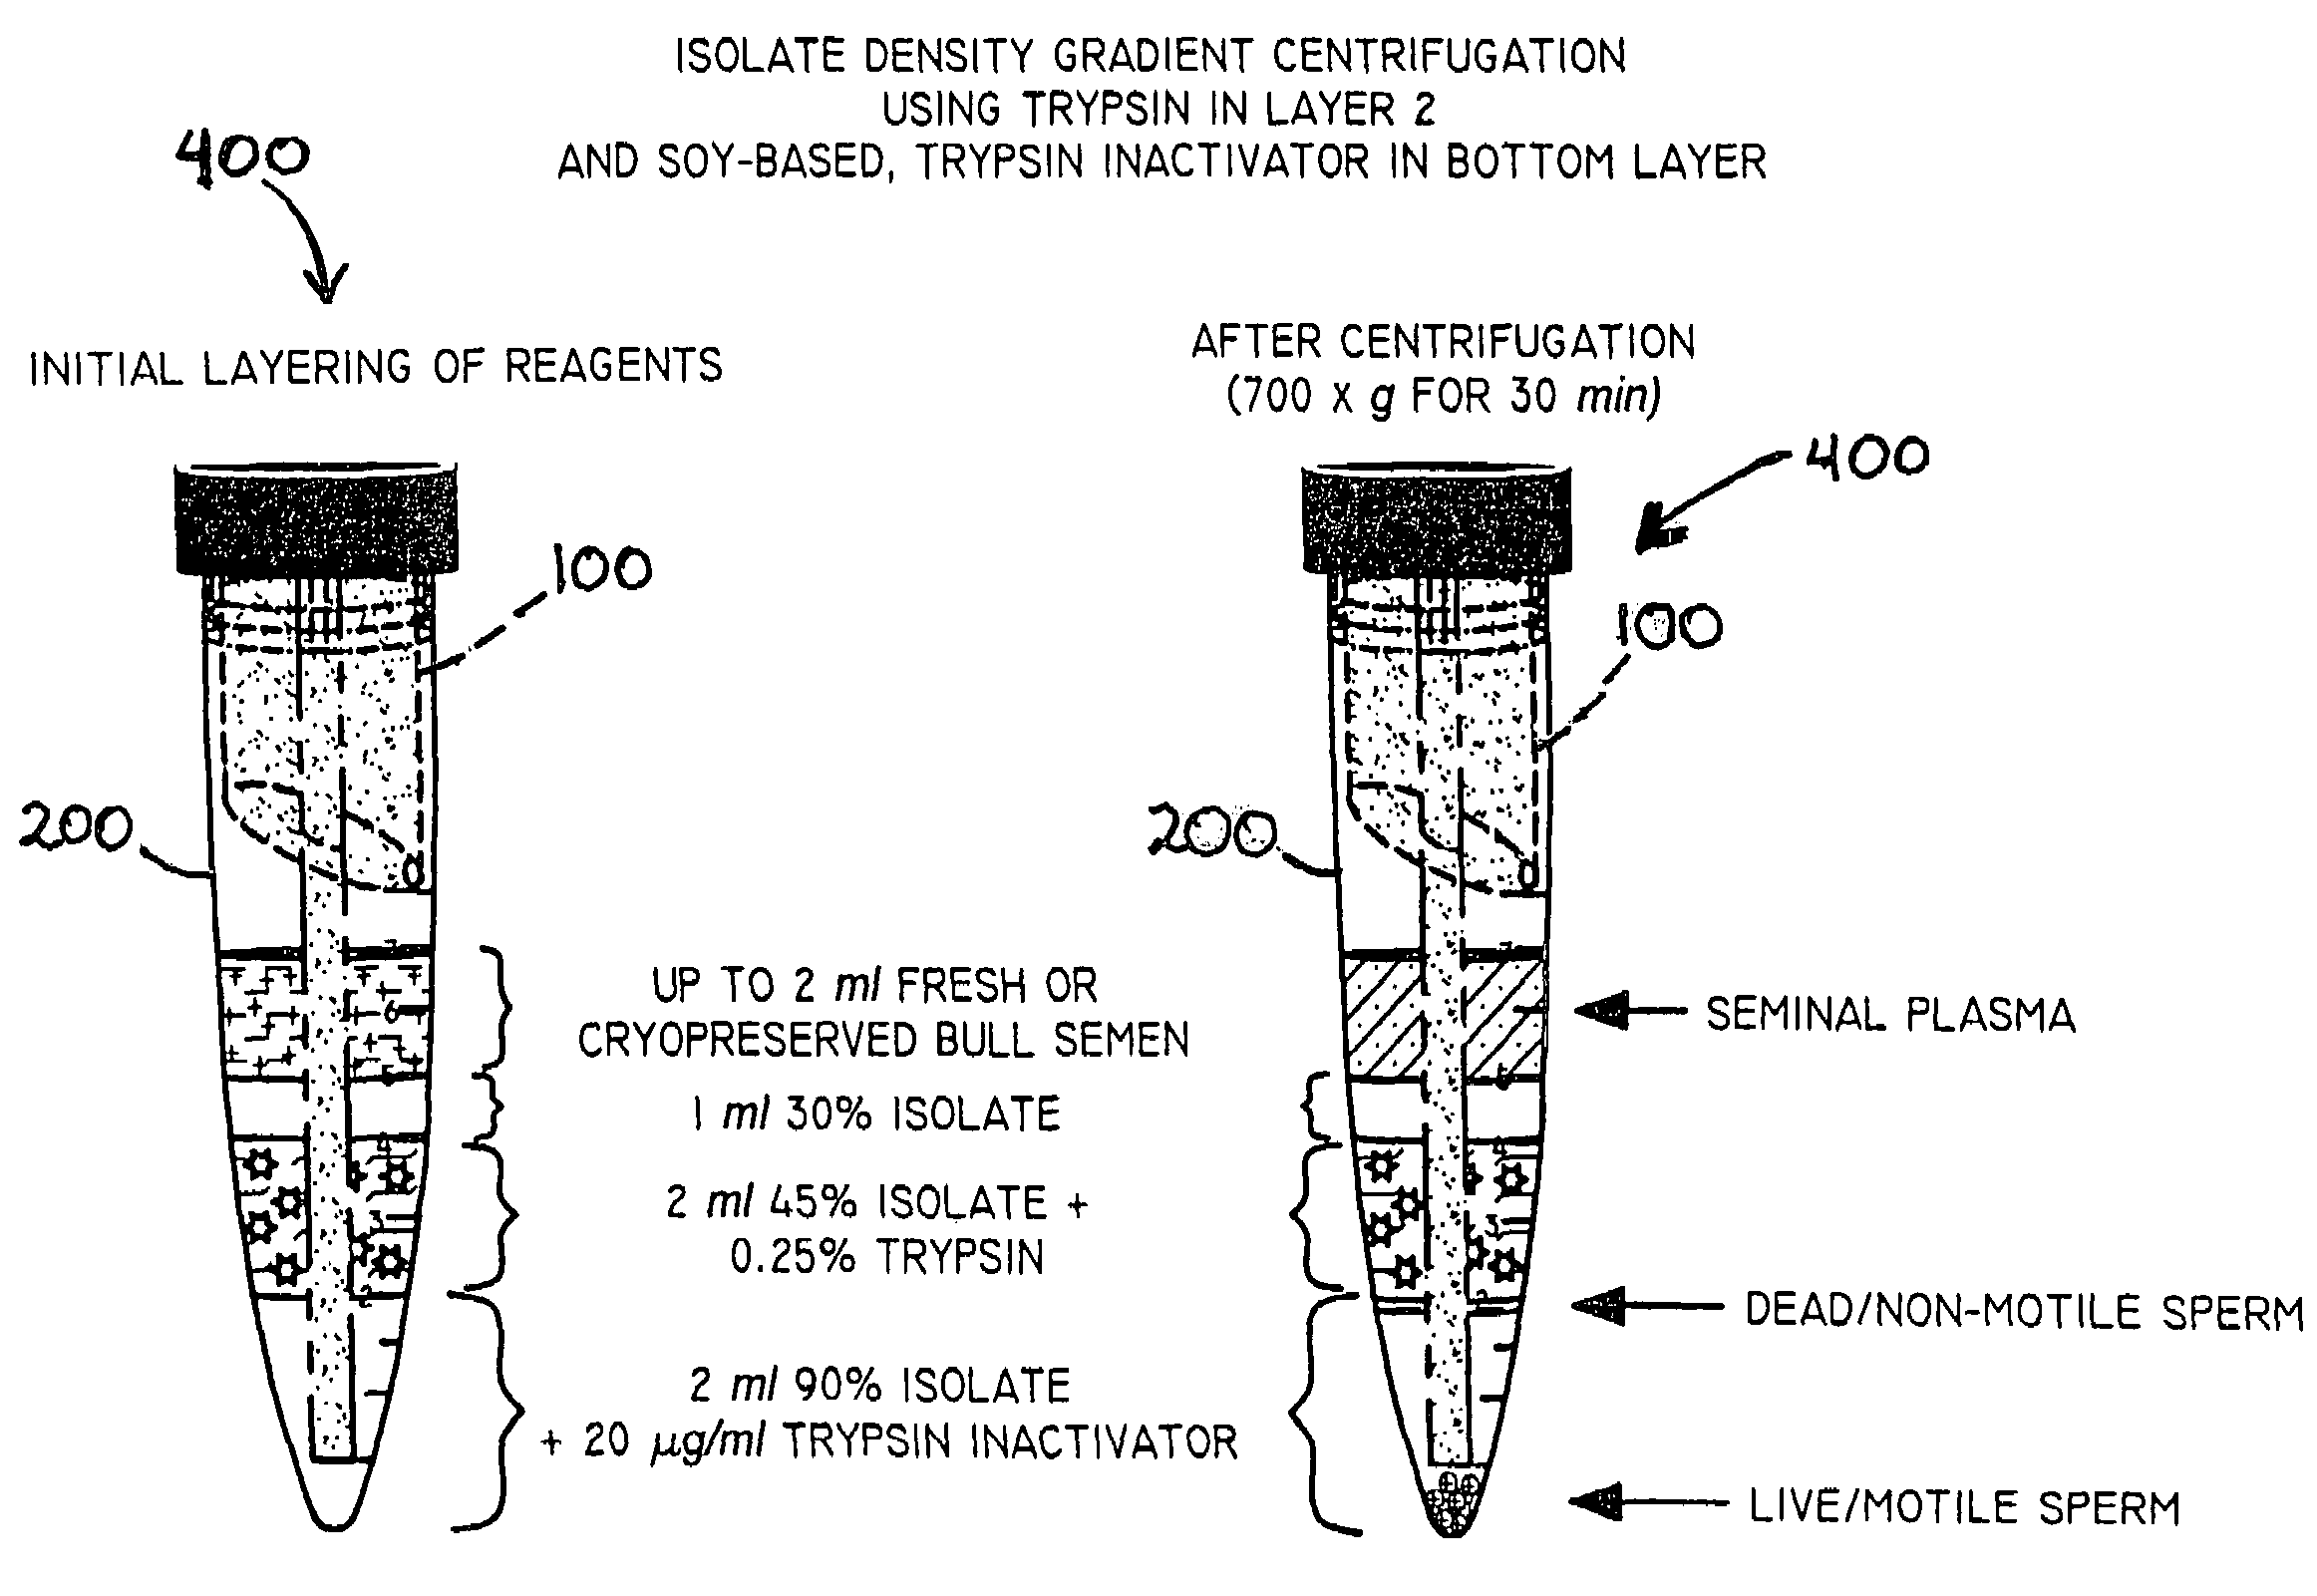 Process for reducing pathogens in a biological sample and removing a sample pellet from a sample tube